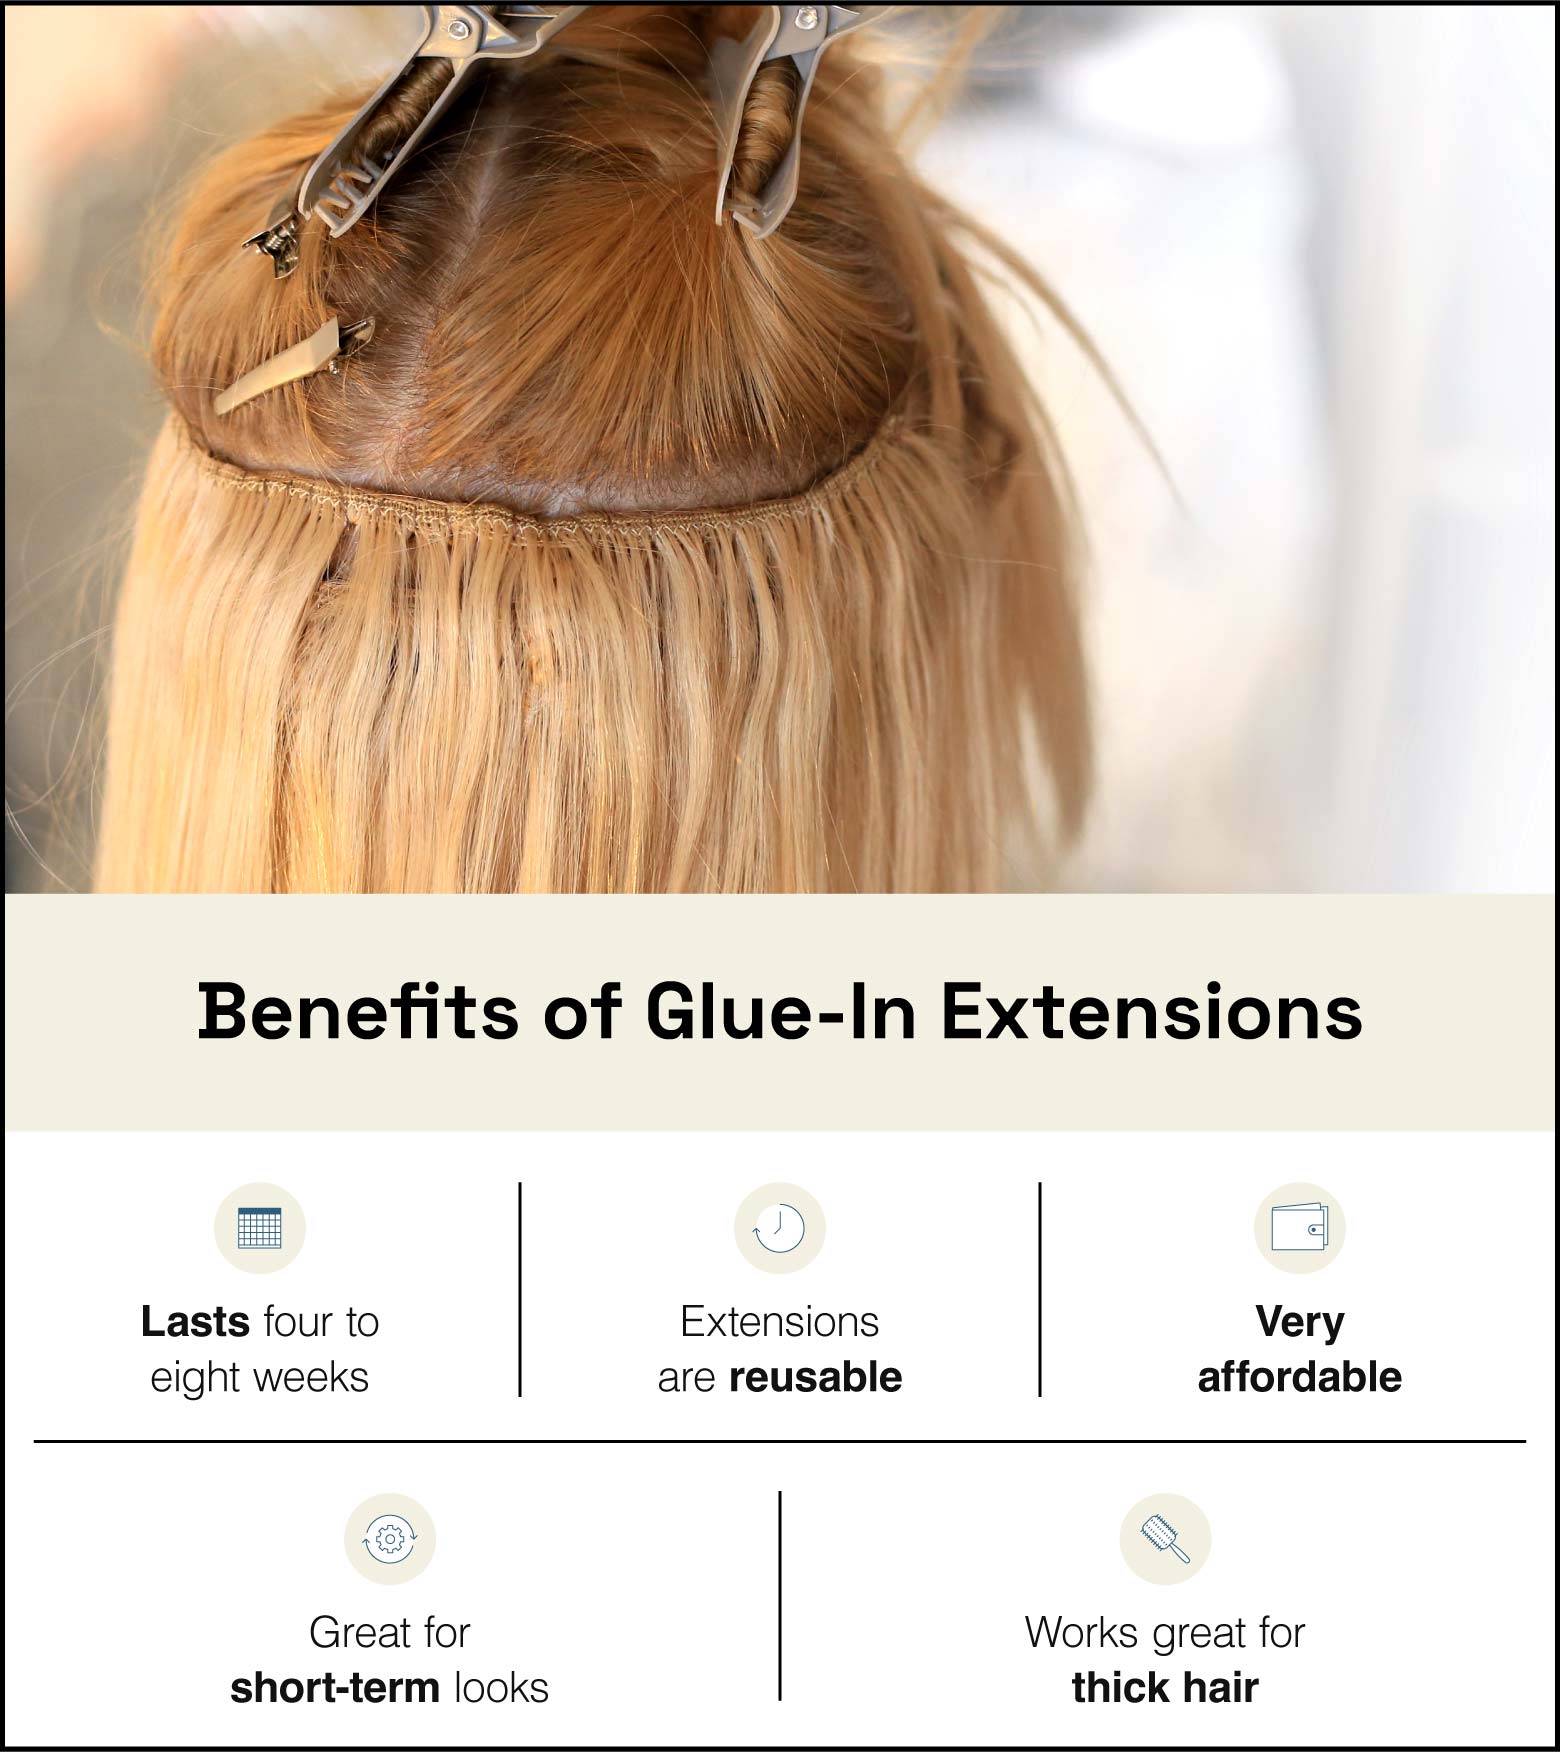 Example of sectioned off hair with glue-in extensions drying. Text below summarizes benefits of glue-in extensions.